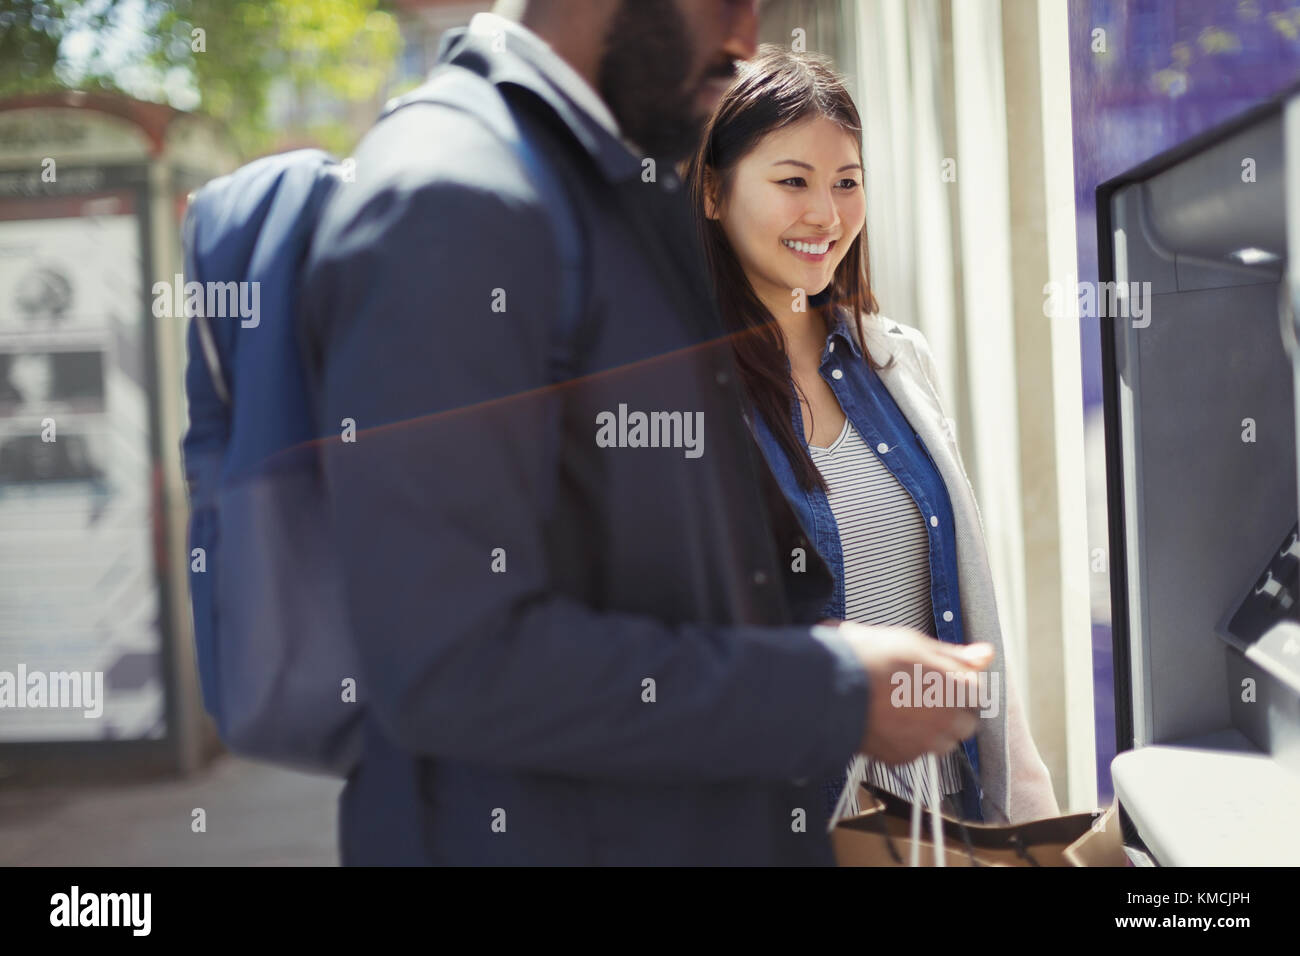 Young couple using ATM Stock Photo